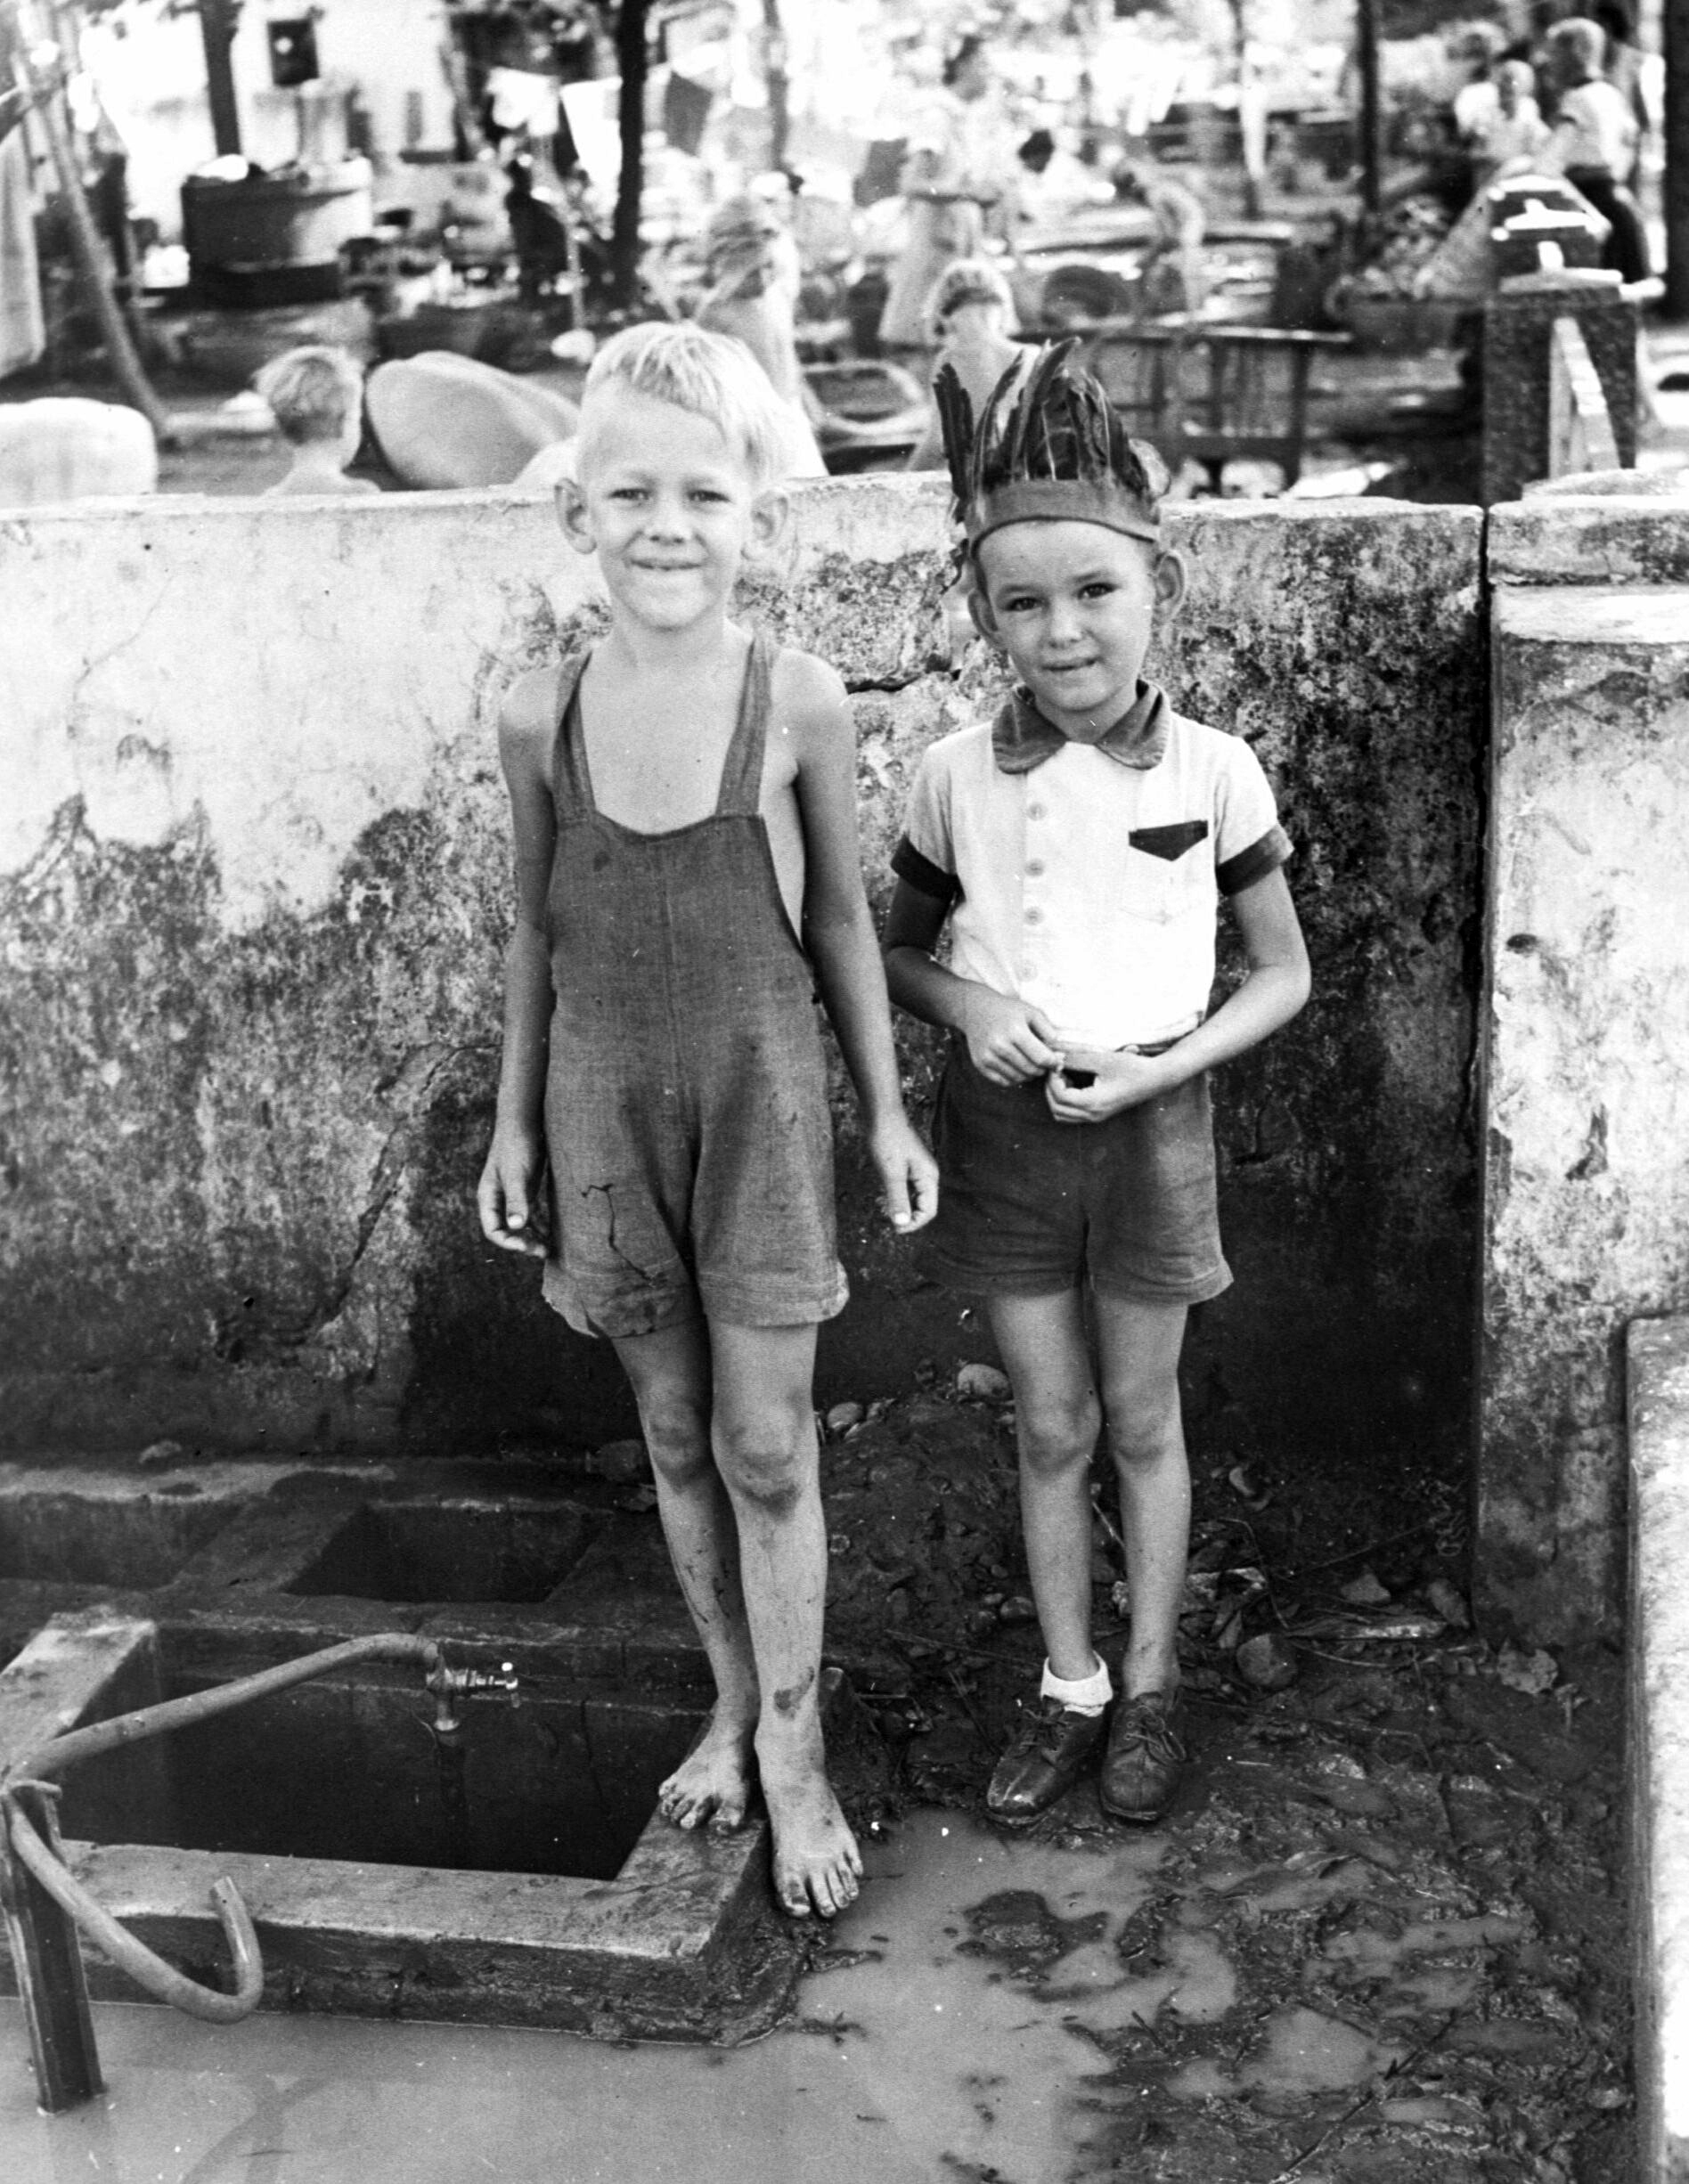 The Author, age 7 (barefoot) and friend